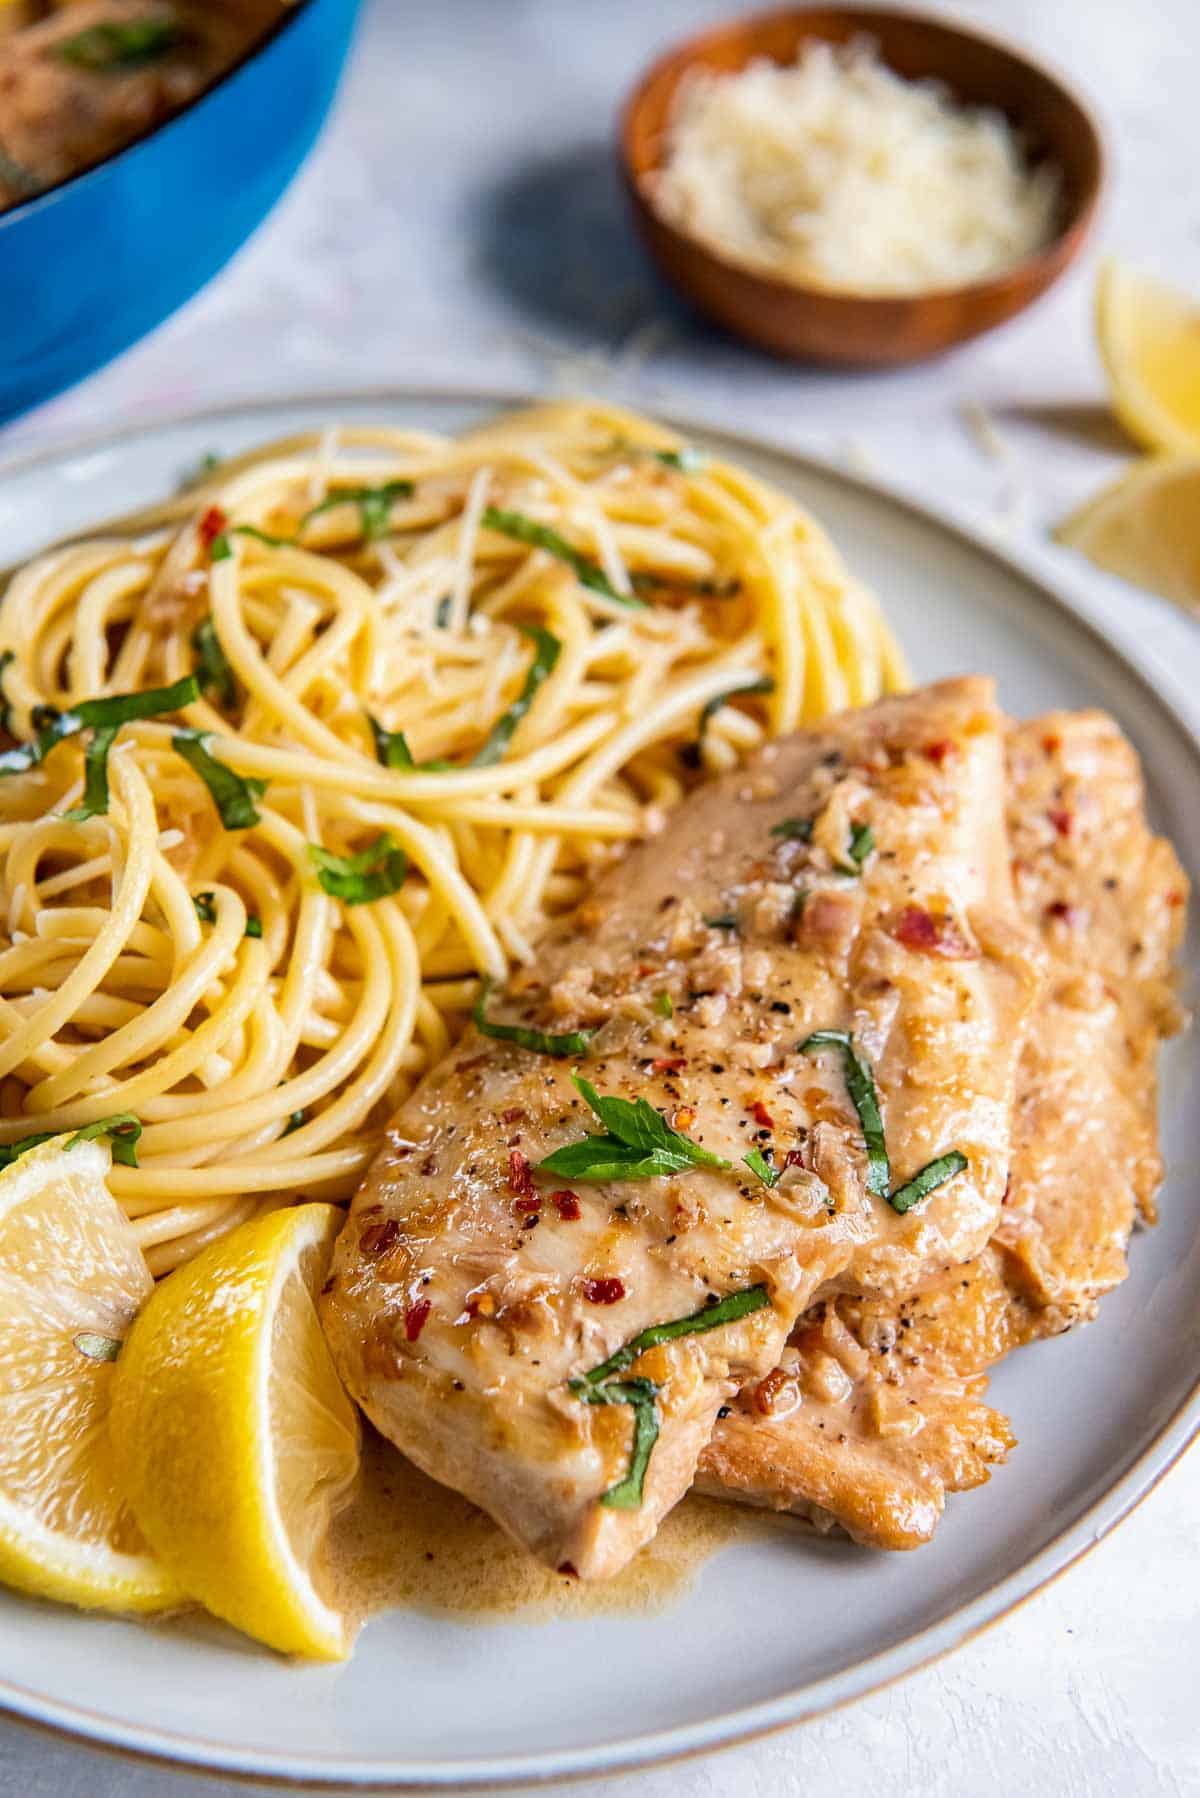 Lemon chicken and pasta on a plate witih lemon wedges.